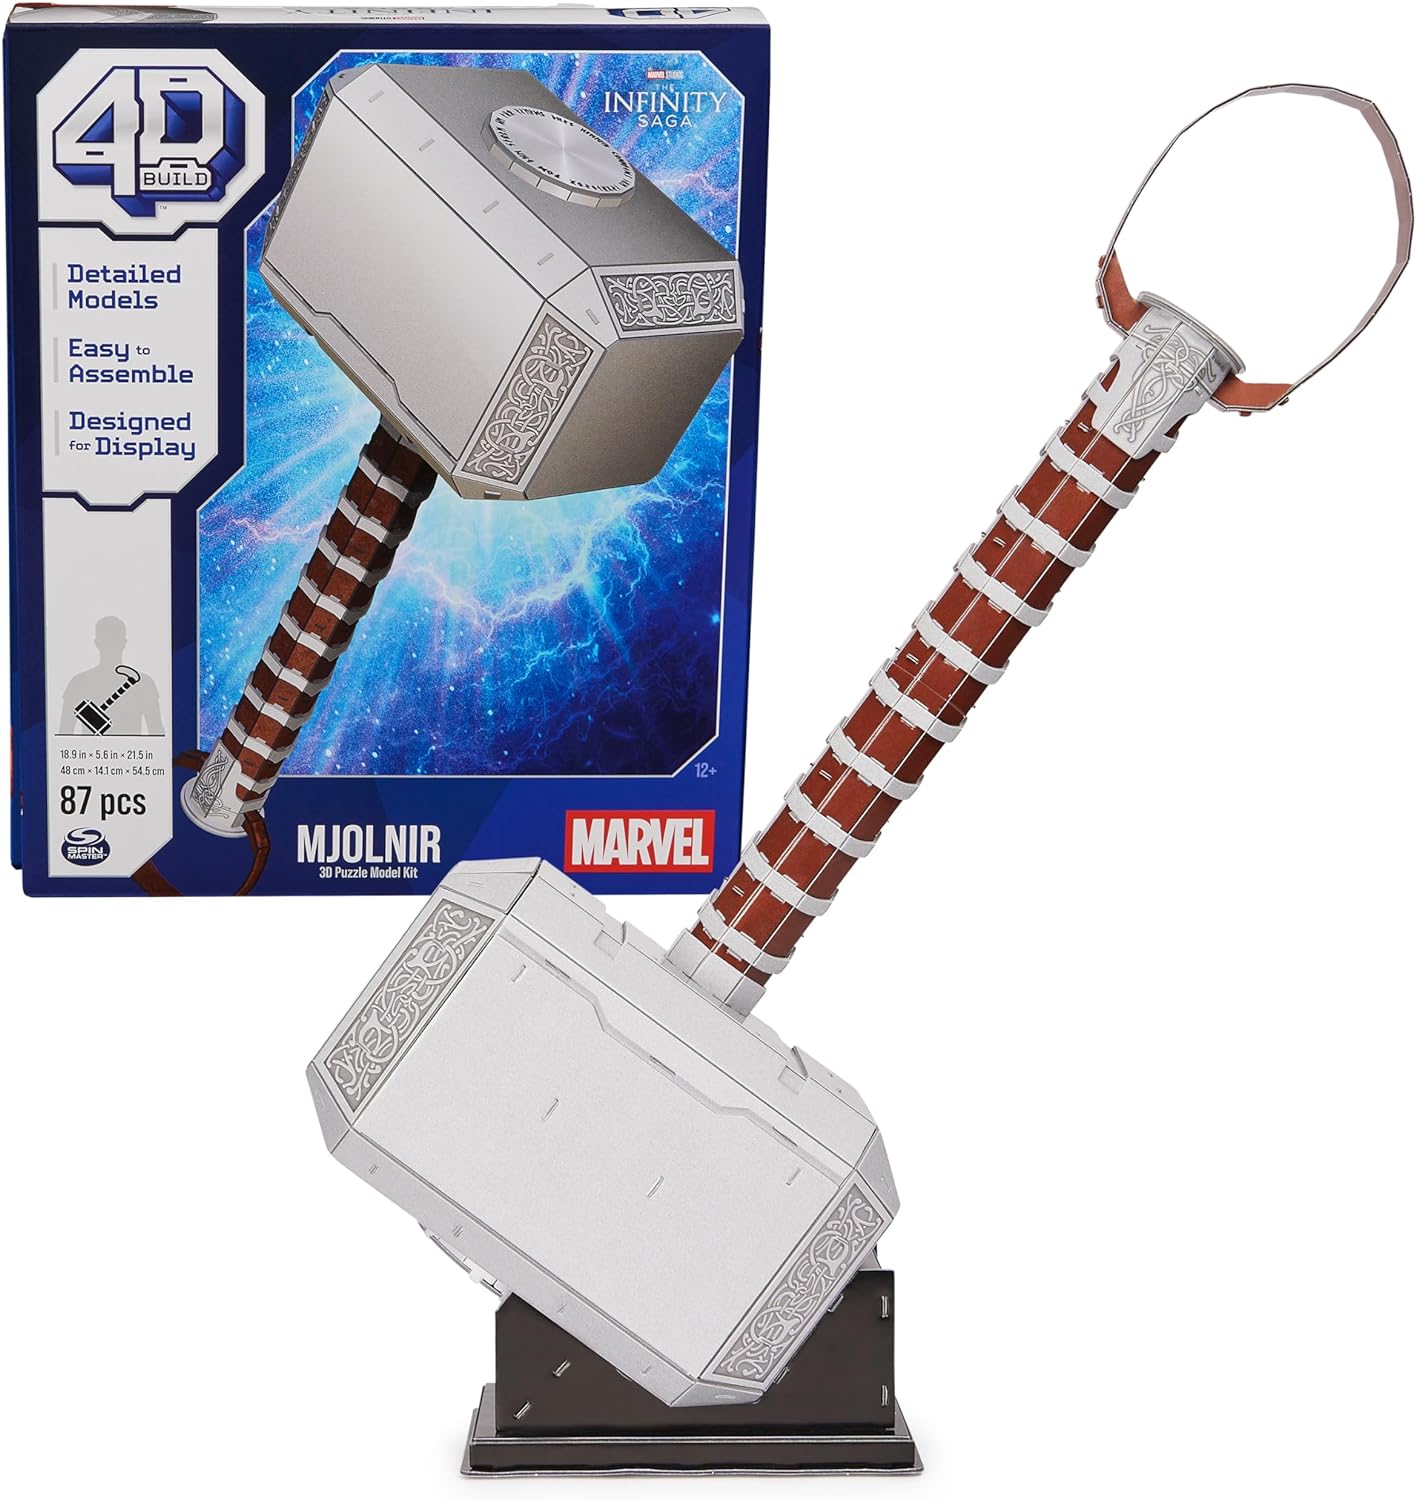 87-Piece 4D Build Marvel Mjolnir Thor's Hammer 3D Puzzle Model Kit w/ Stand $6.20 + Free Shipping w/ Prime or on orders over $35